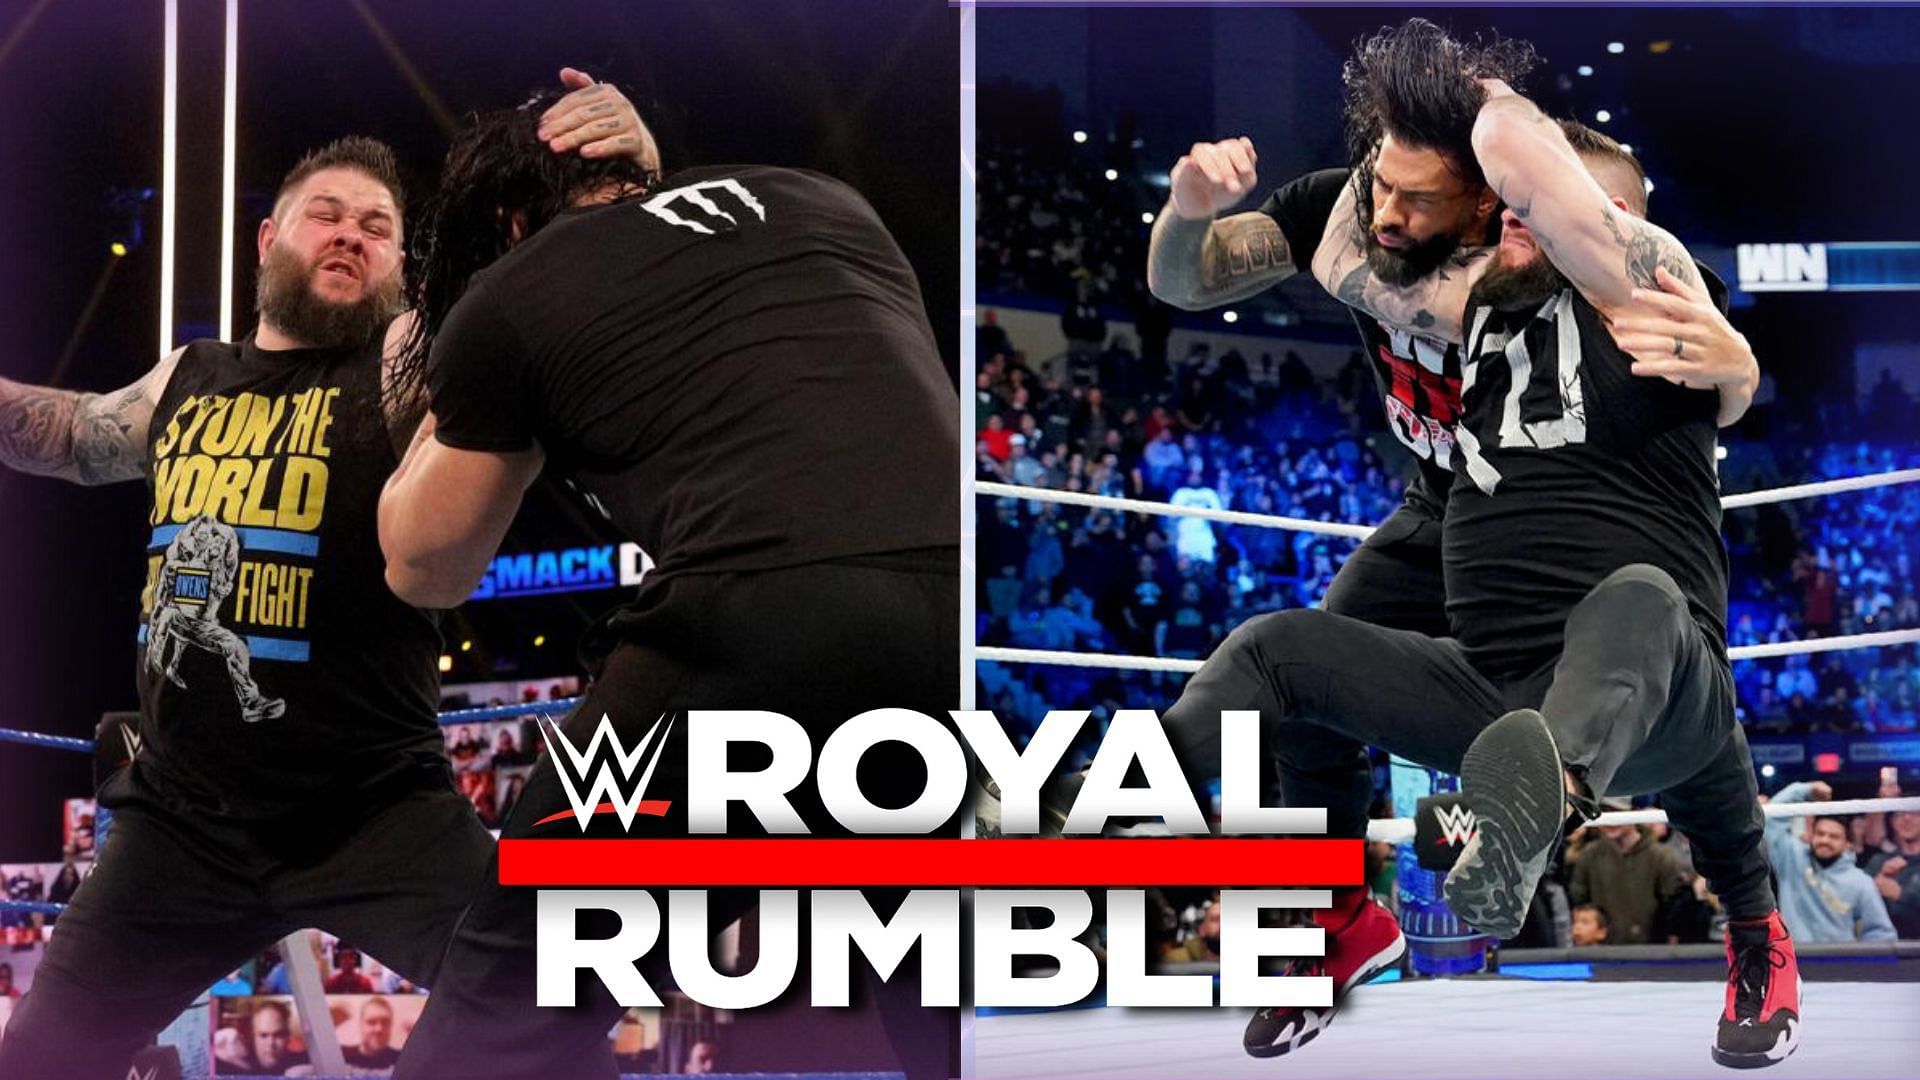 Kevin Owens and Roman Reigns will clash at the WWE Royal Rumble